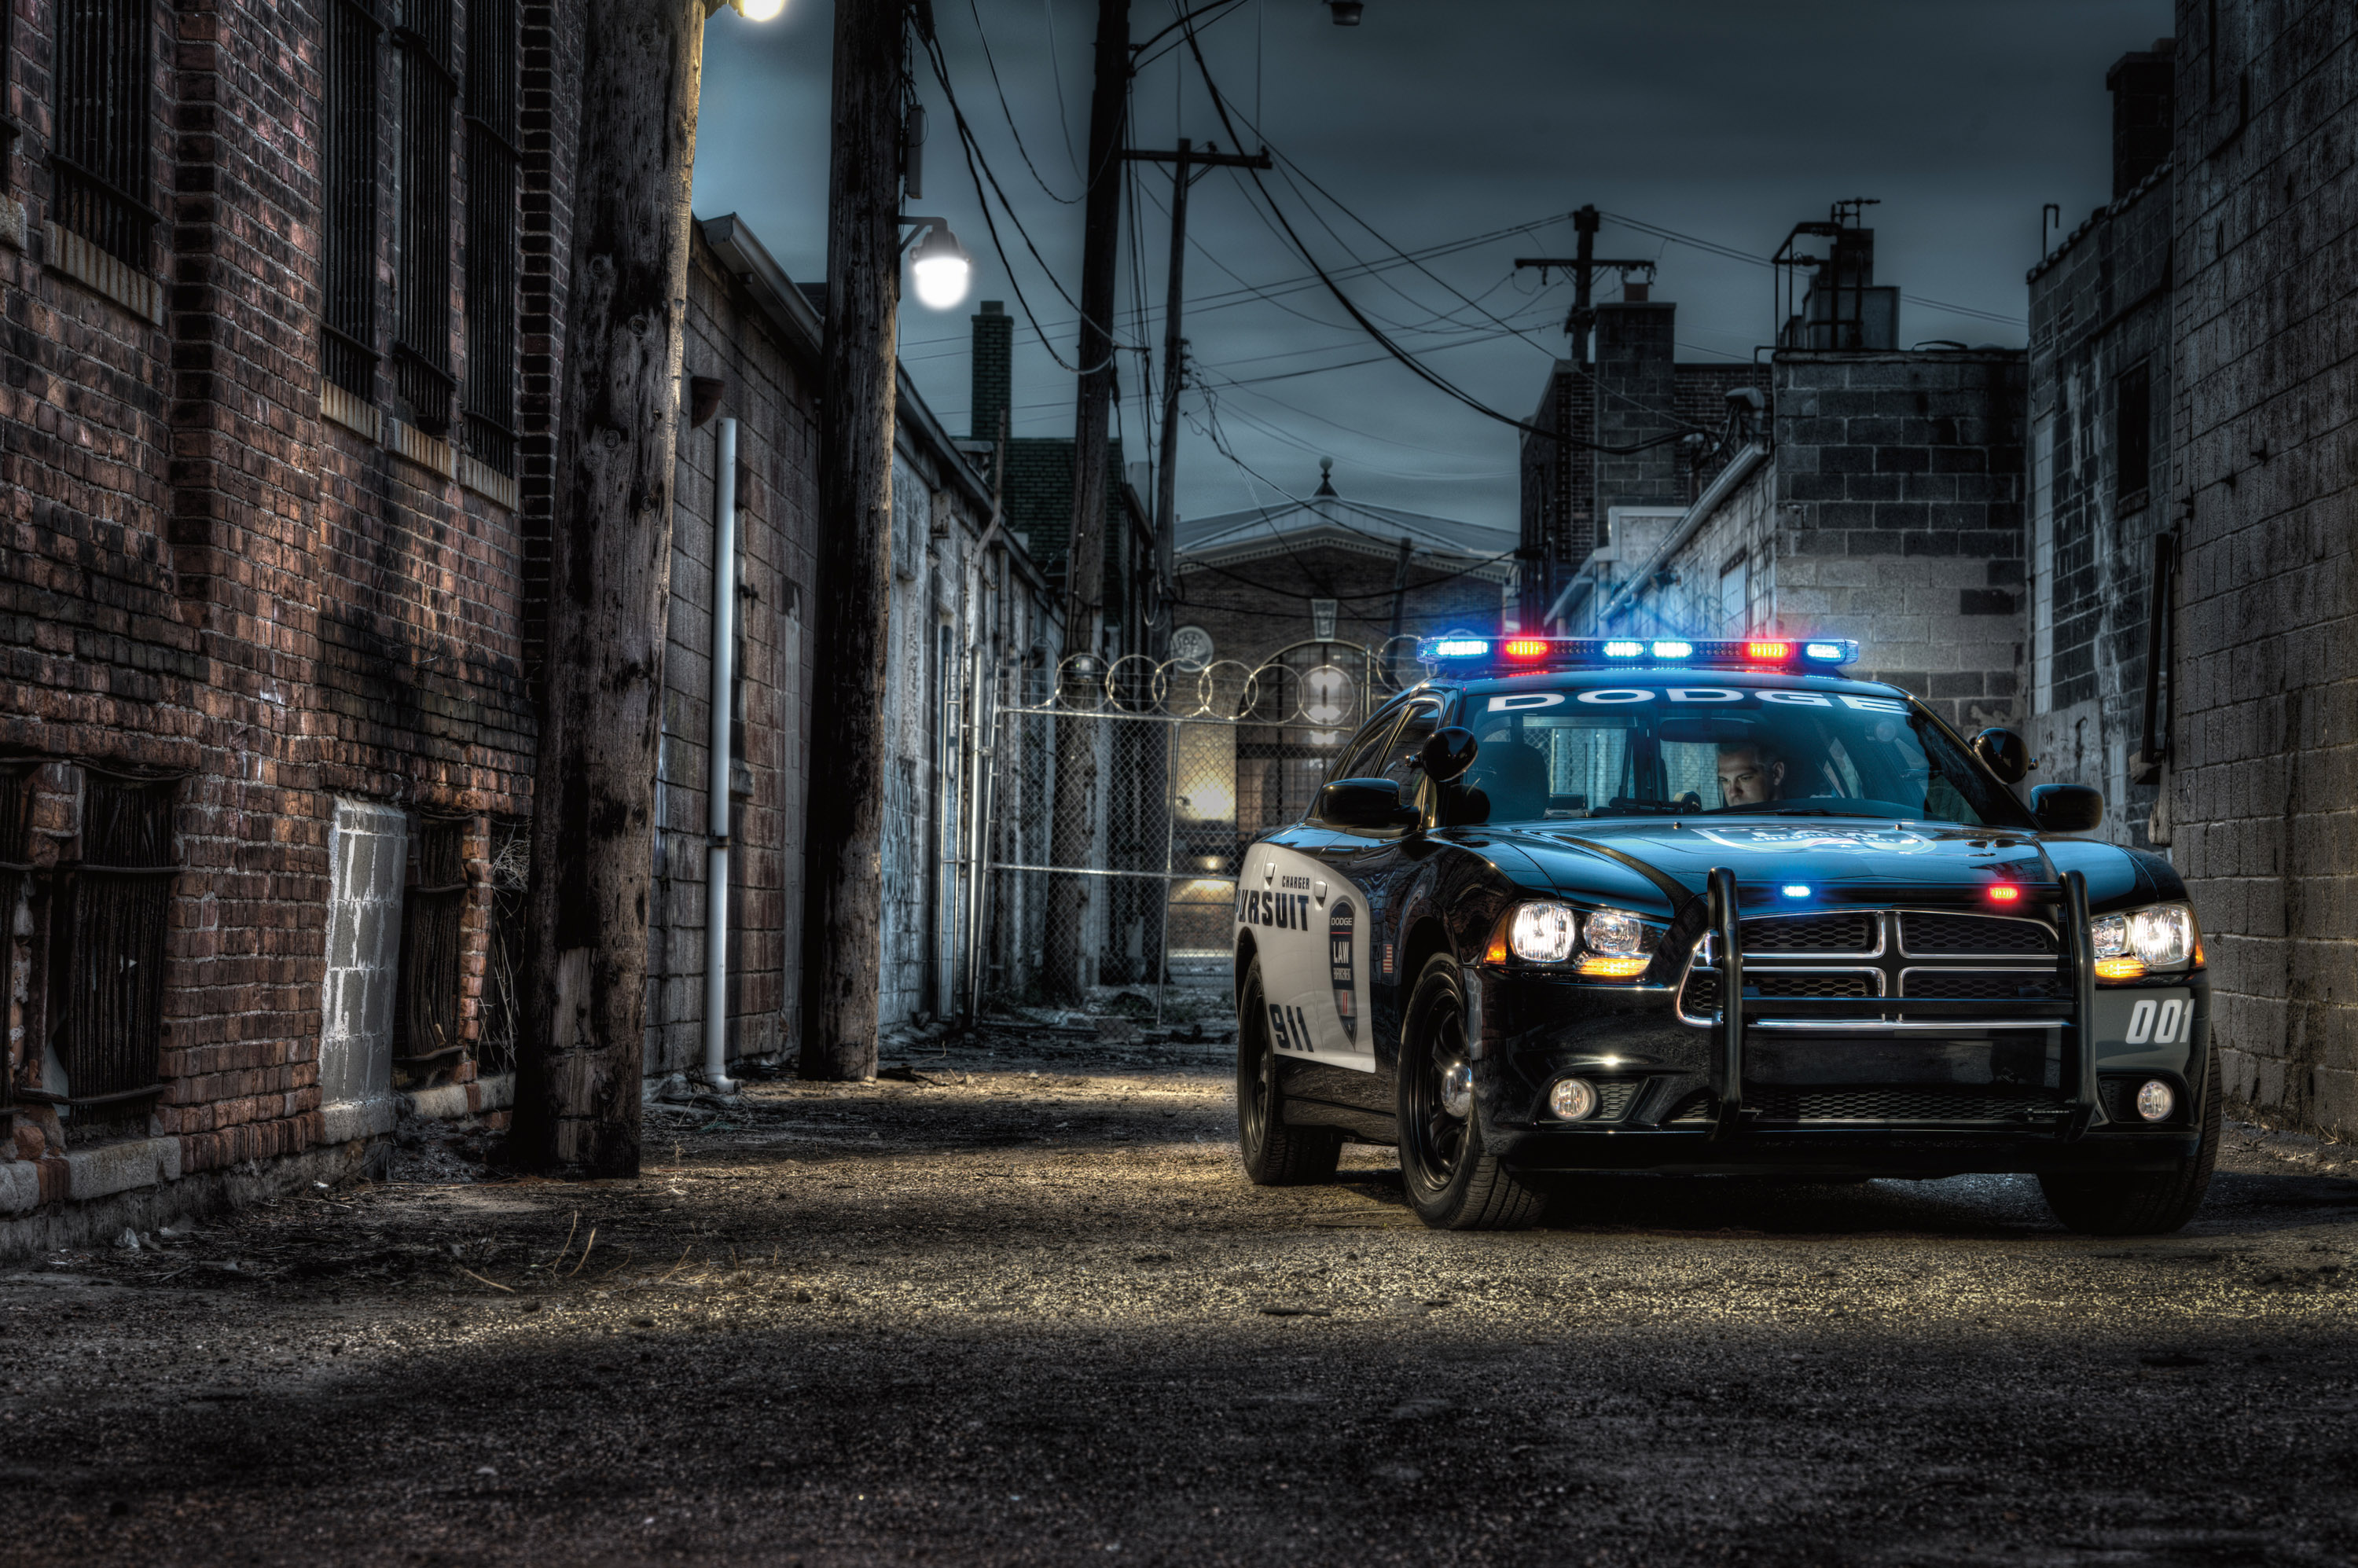  Presents Wallpaper Wednesday 2013 Dodge Charger Pursuit Police Car